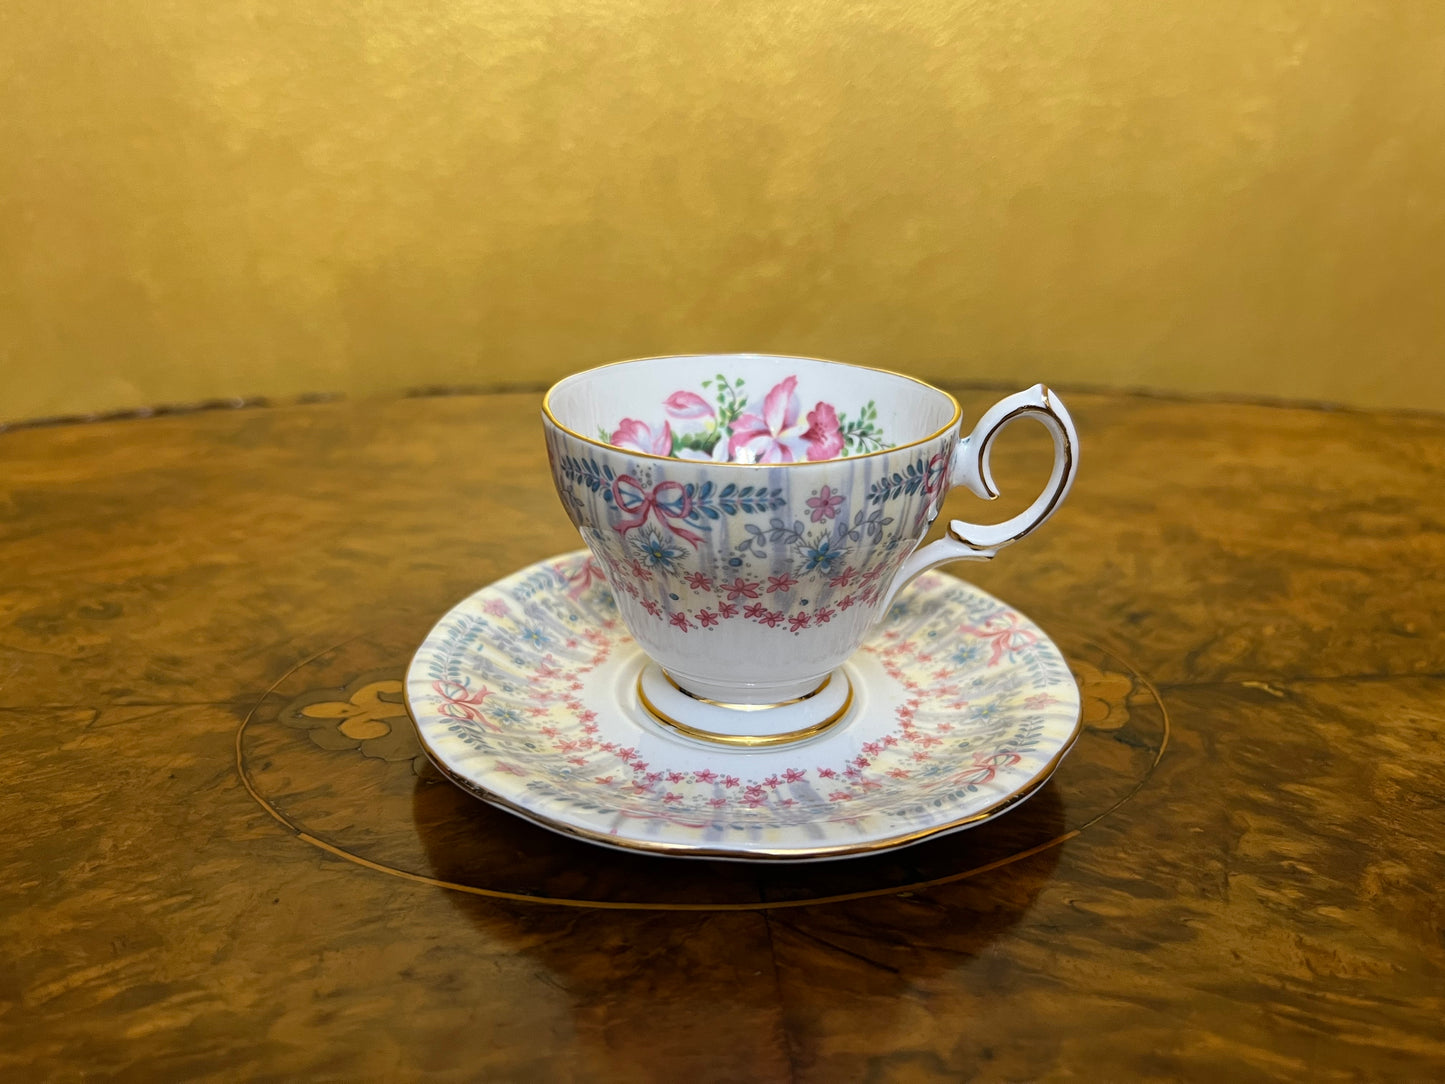 Vintage Royal Bridal Crown Queen Anne Tea Cup and Saucer